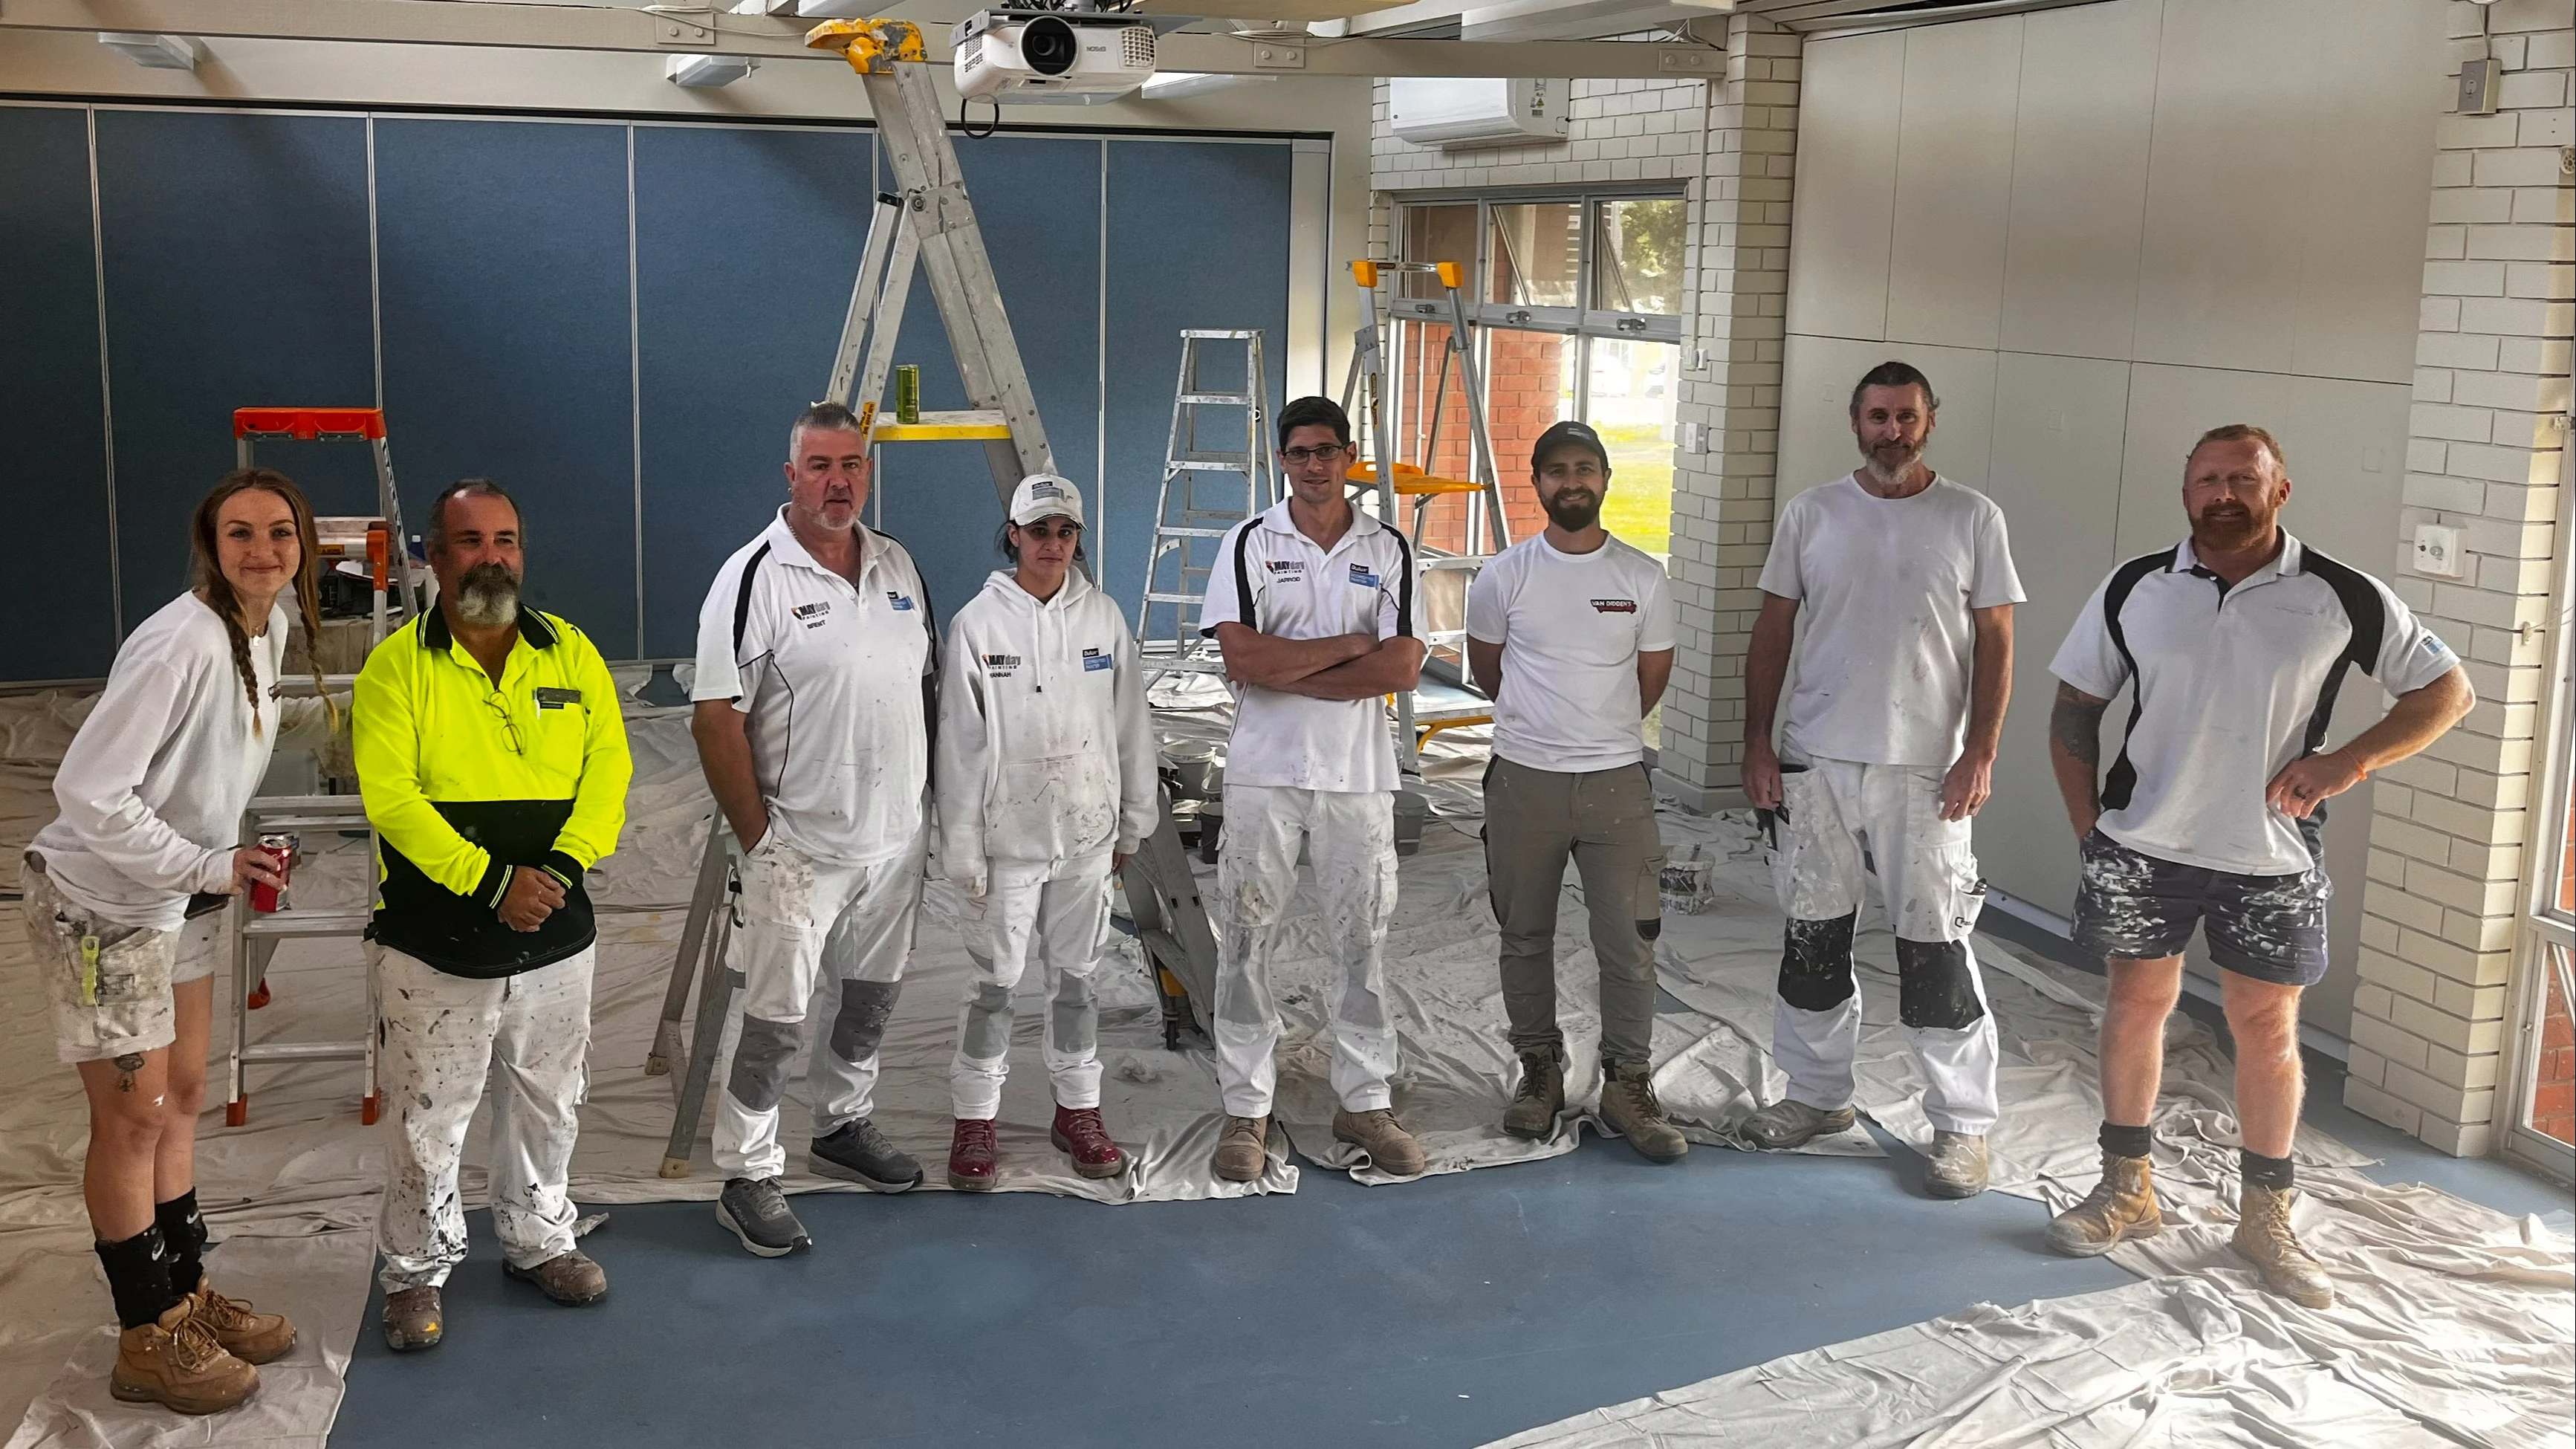 Dulux Accredited Painters supporting our community